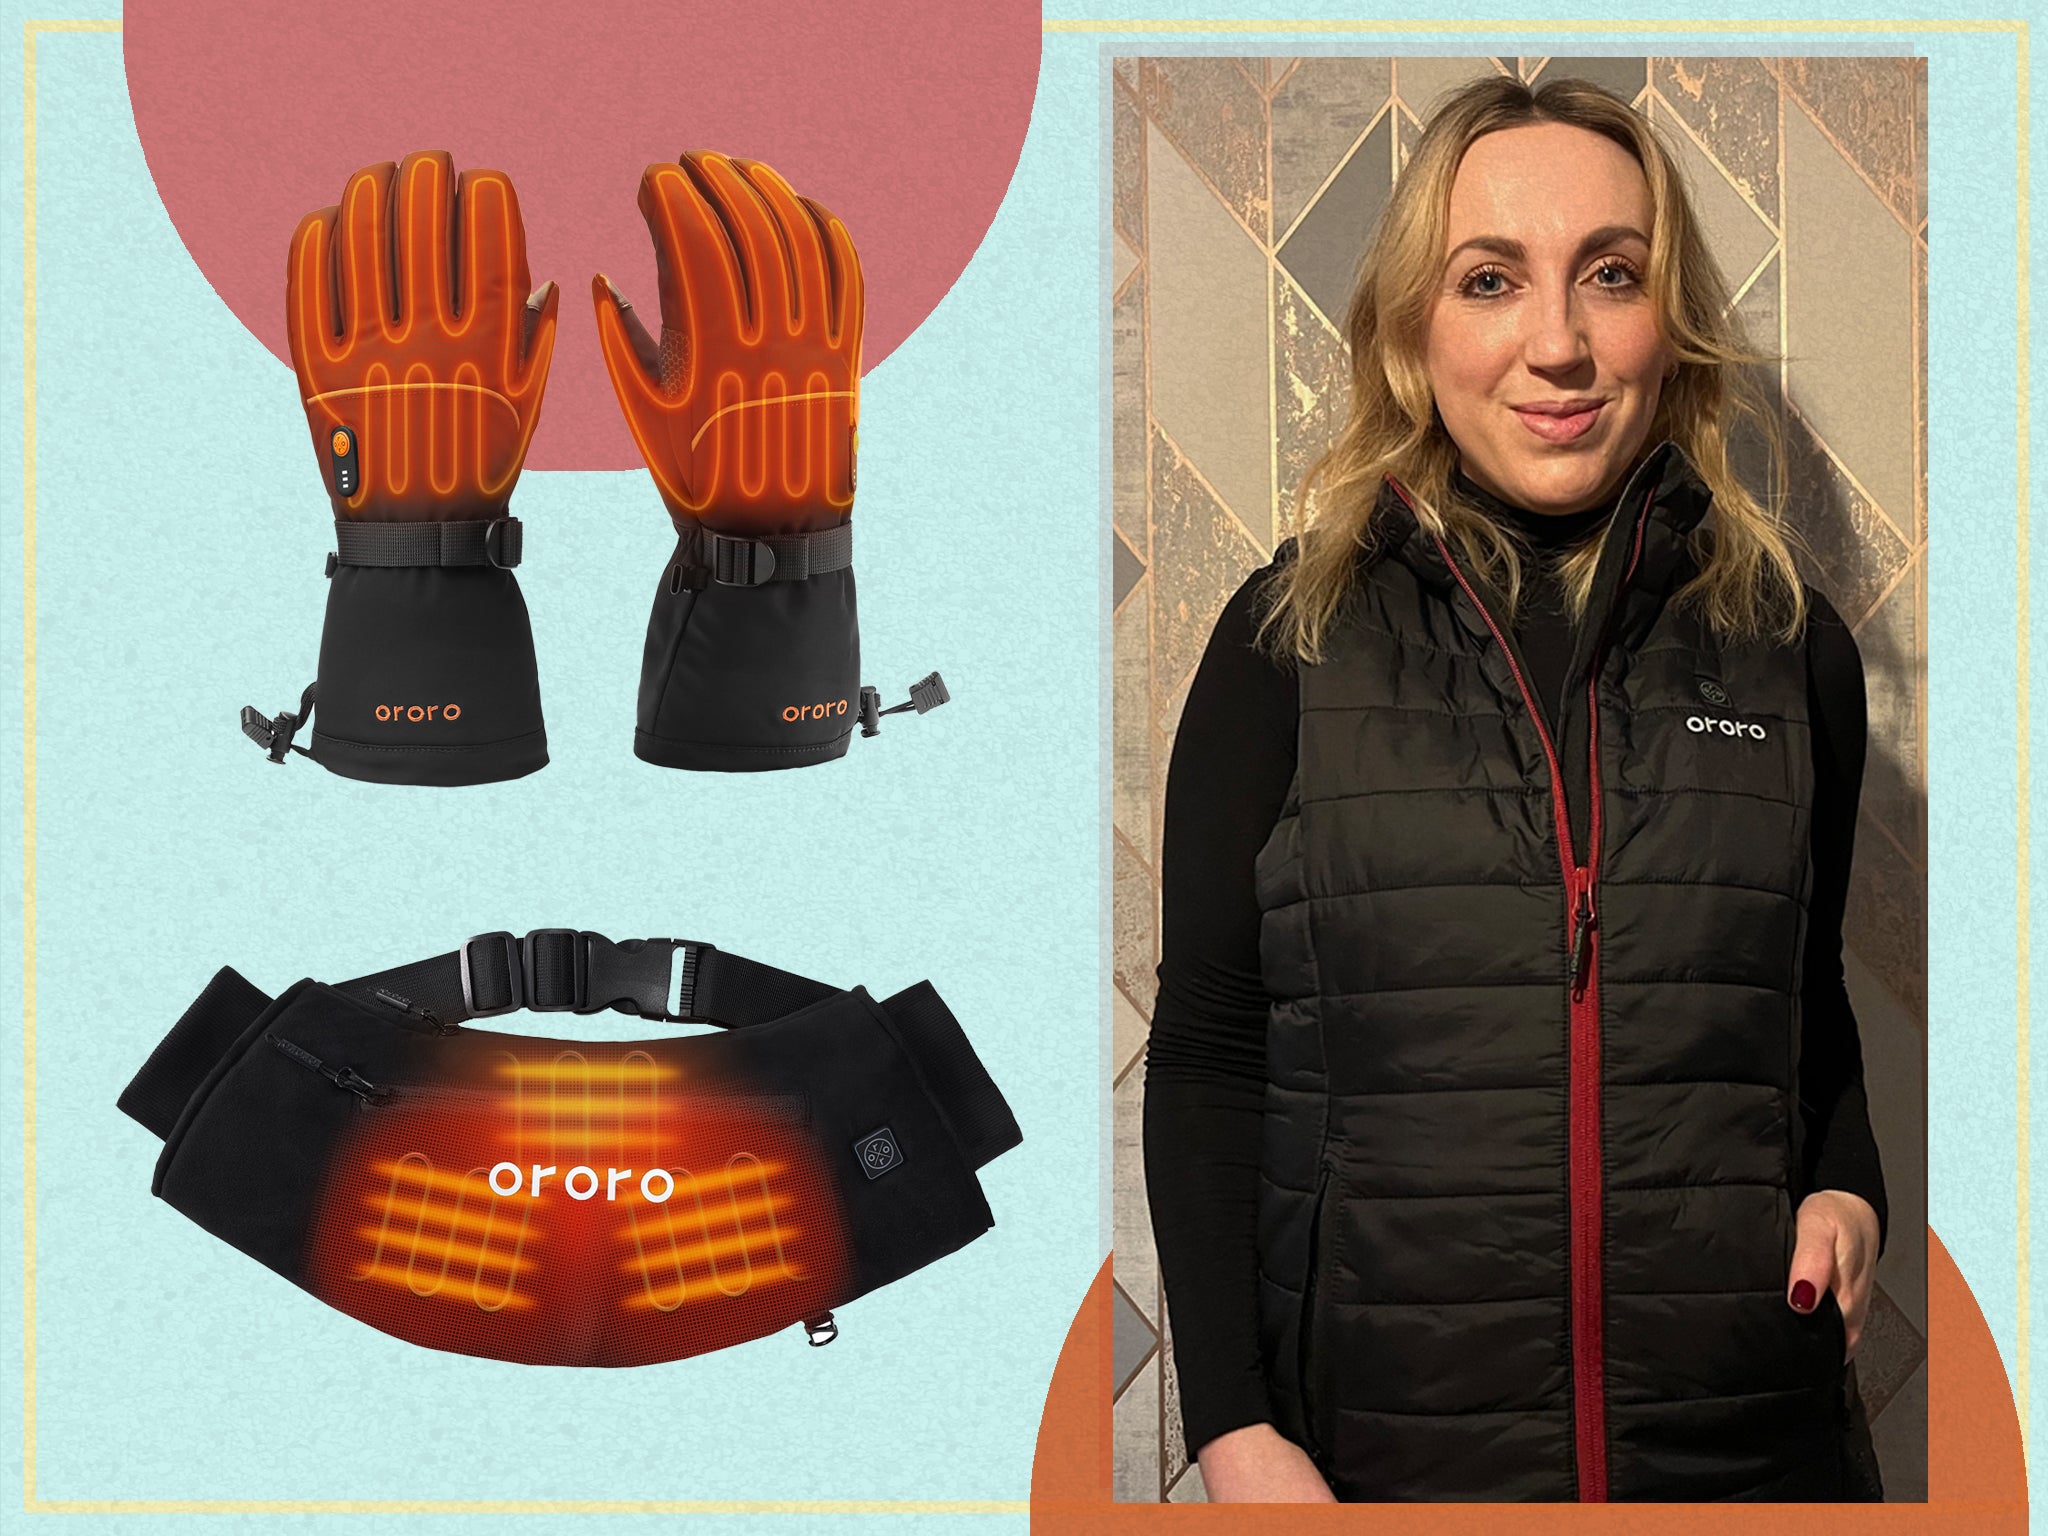 These reusable hand warmers are perfect for your next ski trip